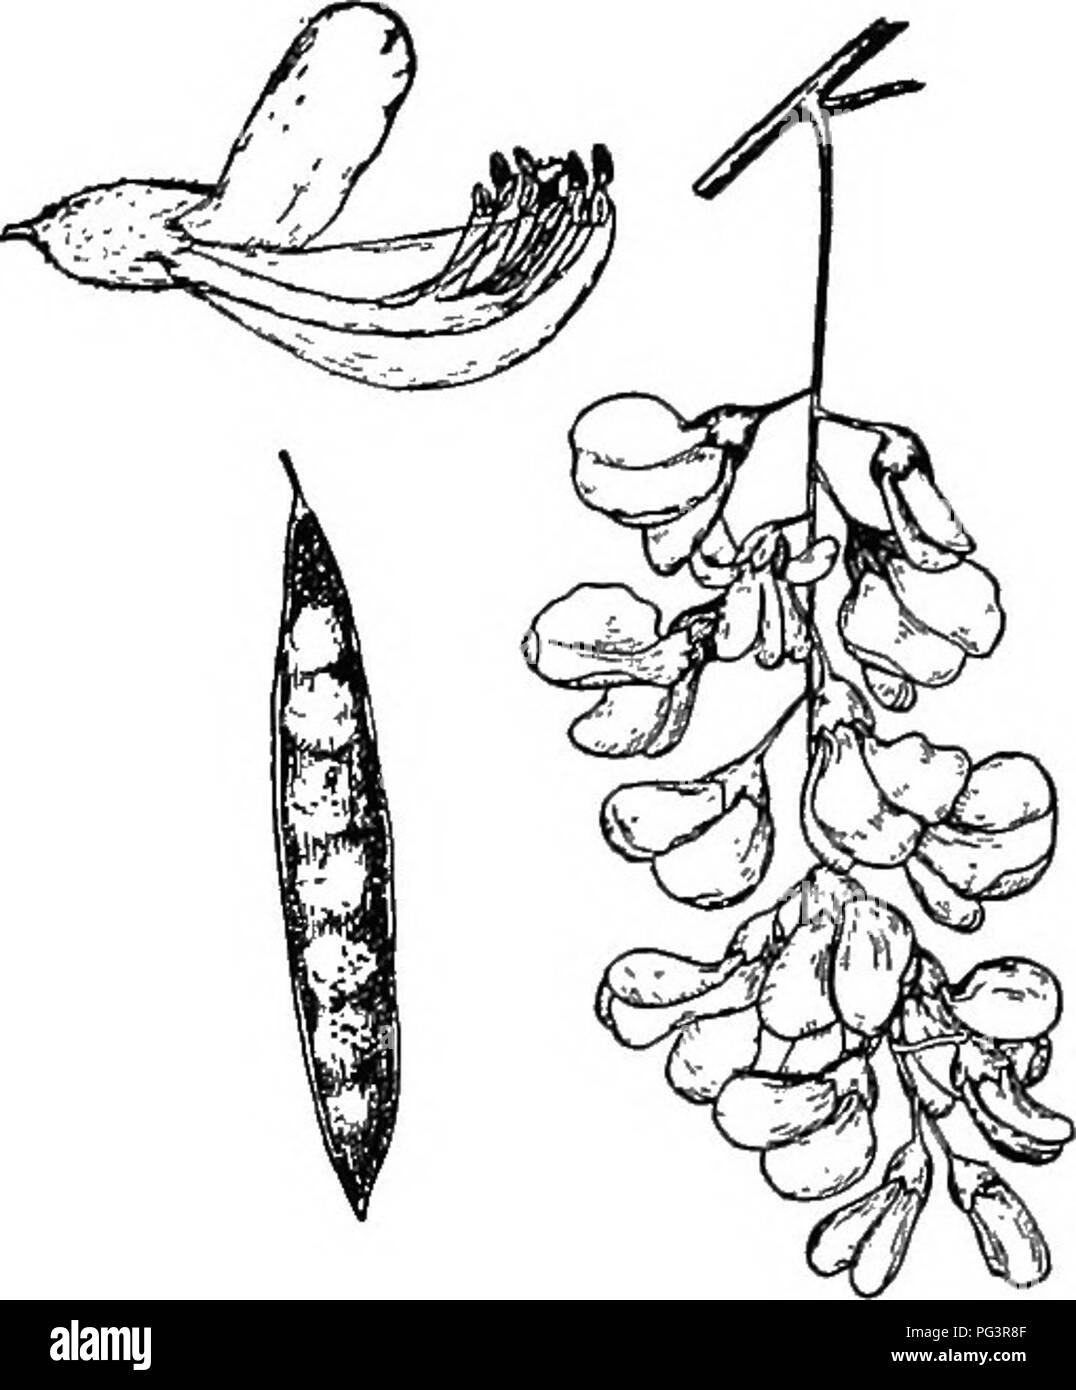 . Botany for agricultural students . Botany. PEA FAMILY 485 unite (Fig. 432). In the uniting of some of the petals, the plants of the Pea family suggest those of the Sympetalae which is considered the most advanced group of Dicotyledons. Also irregularity in the shape or size of sepals or petals is considered an advanced feature. The pistil consists of one carpel and be- comes the one-celled fruit called legume, which is characteristic of the family. The Beans, Peas, Peanuts, Soy Beans, Cow-peas, Clovers, Alfalfas, and Vetches make this family a noted one. The value of Beans, Peanuts, and Peas Stock Photo